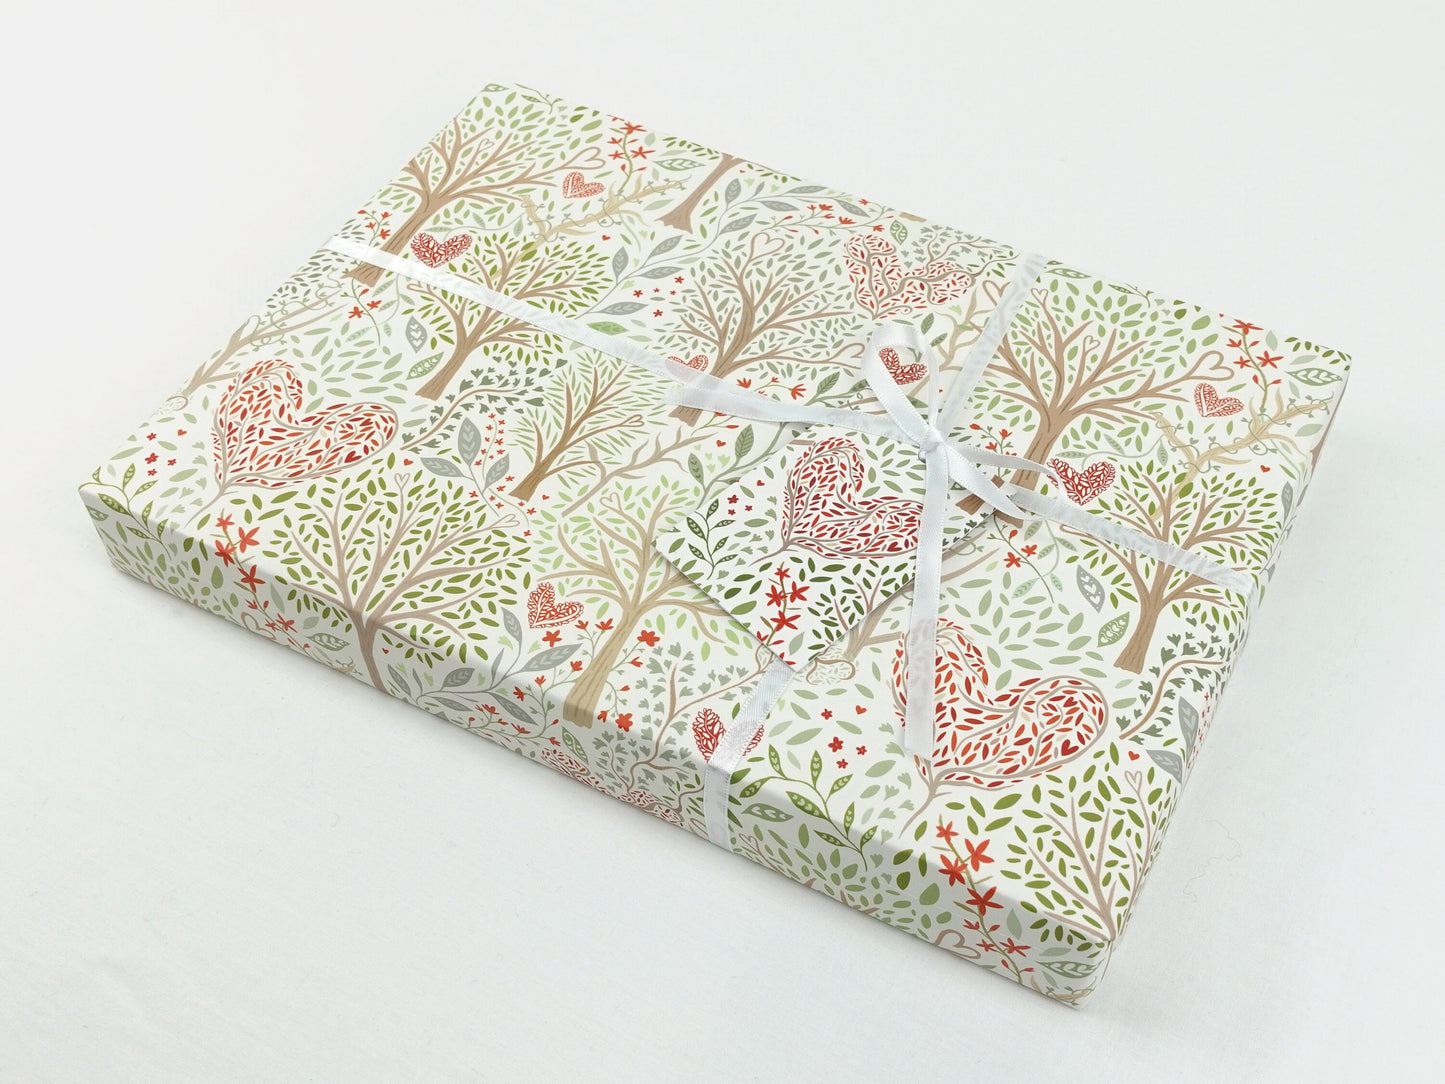 Wedding wrapping paper | Heart woodland design | Anniversary eco friendly gift wrap | Premium sheets + Tags | Zero plastic packaging 70x50cm